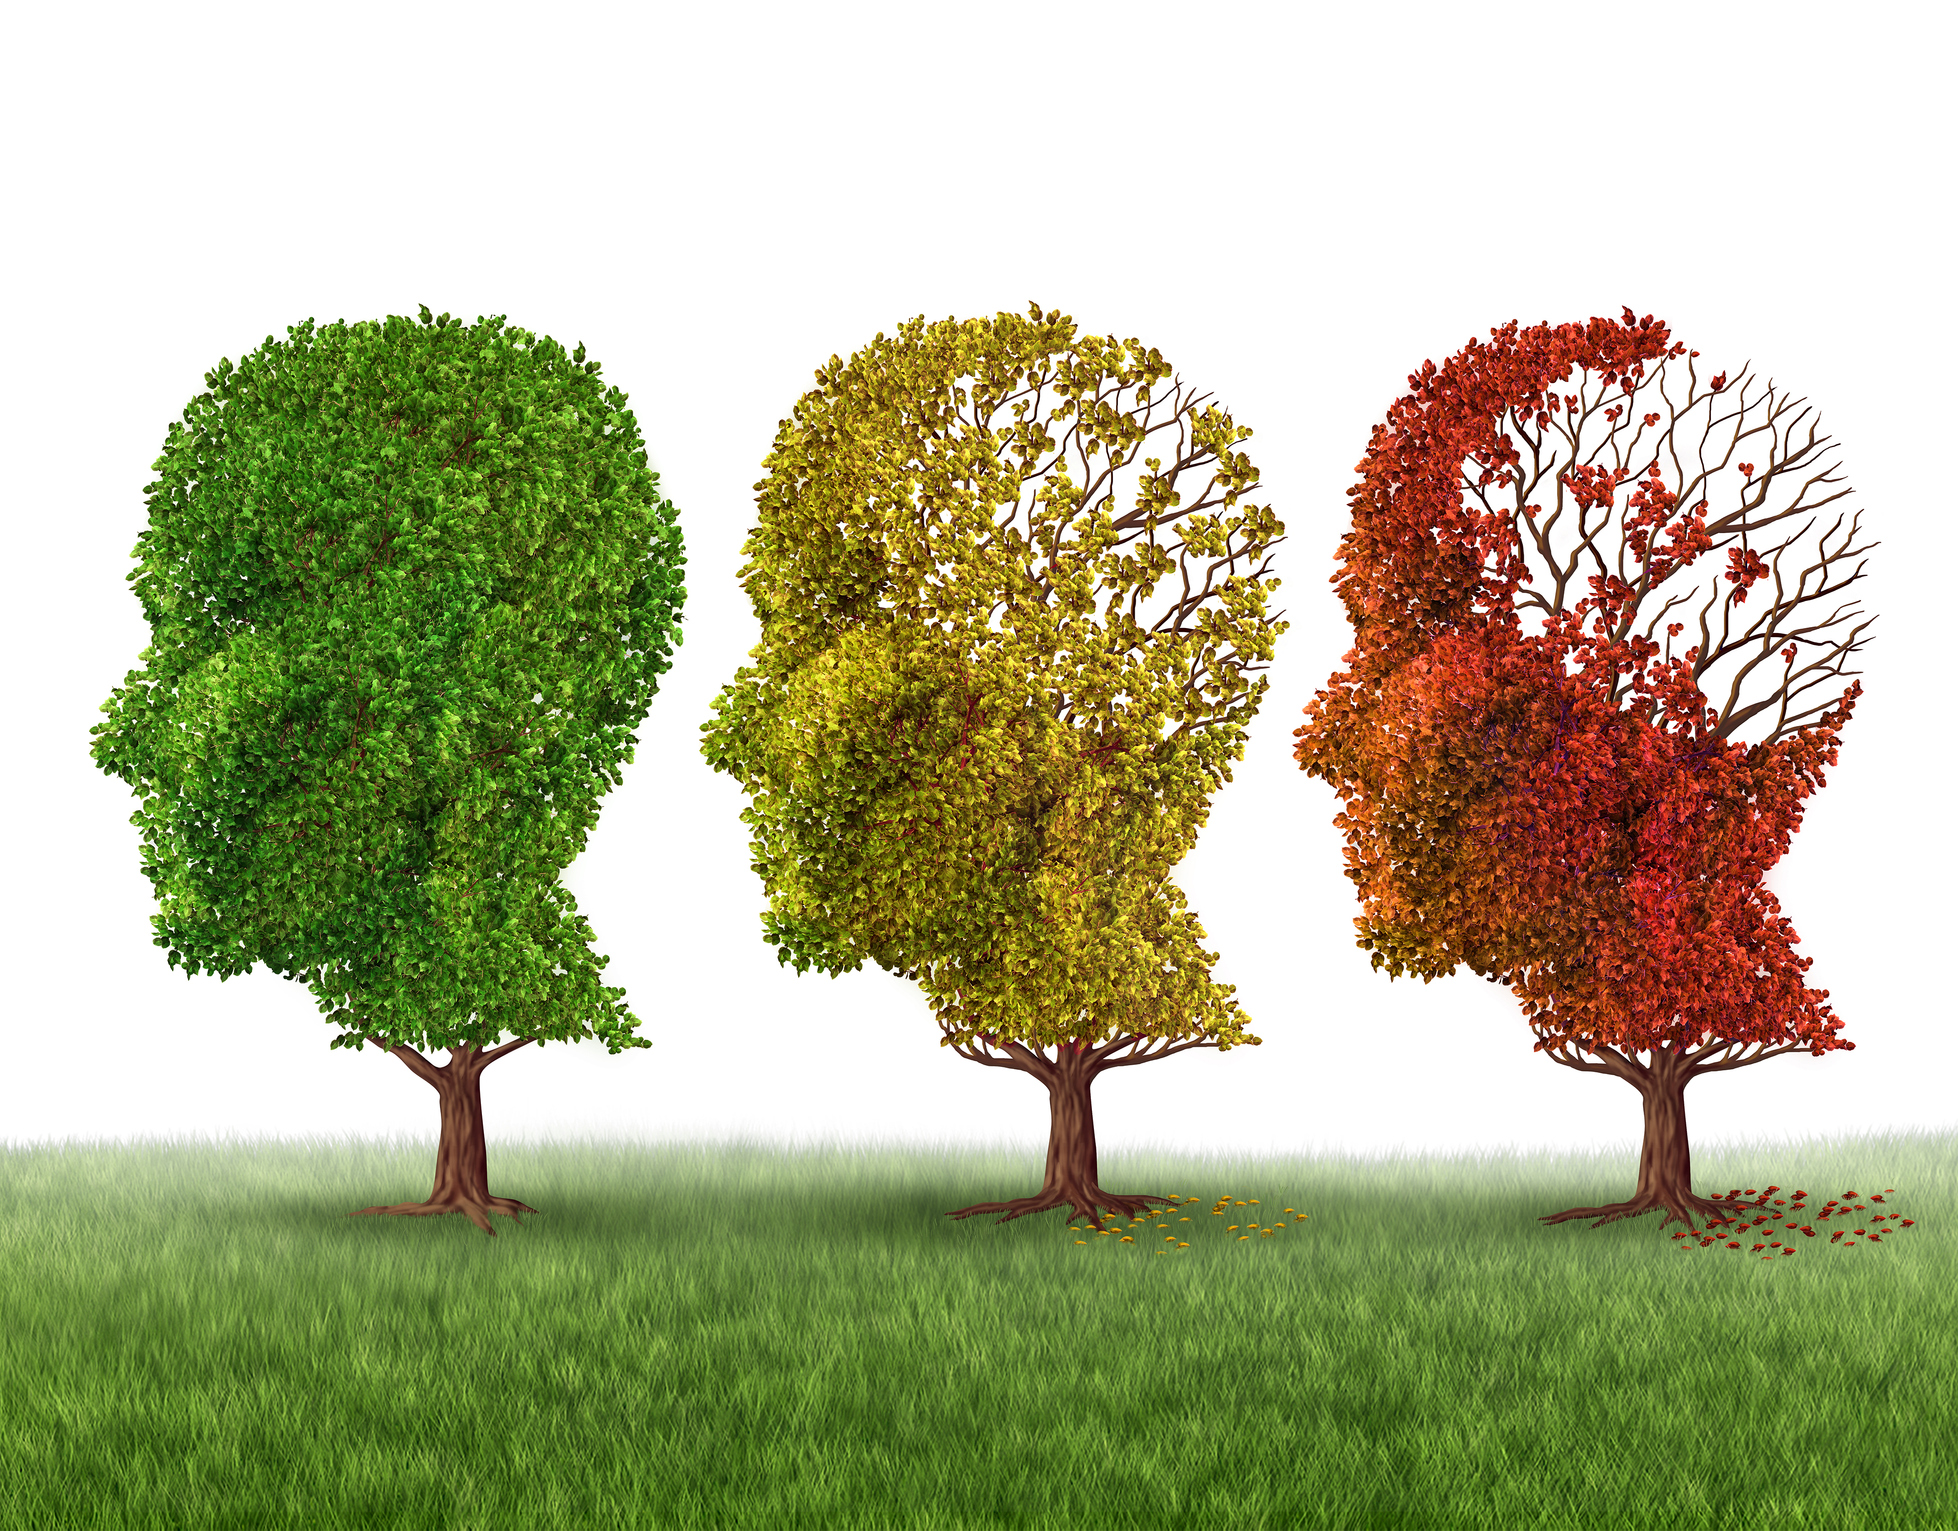 Memory loss and brain aging due to dementia and alzheimer's disease as a medical icon of a group of color changing autumn fall trees shaped as a human head losing leaves as intelligence function on a white background.1958 x 1531